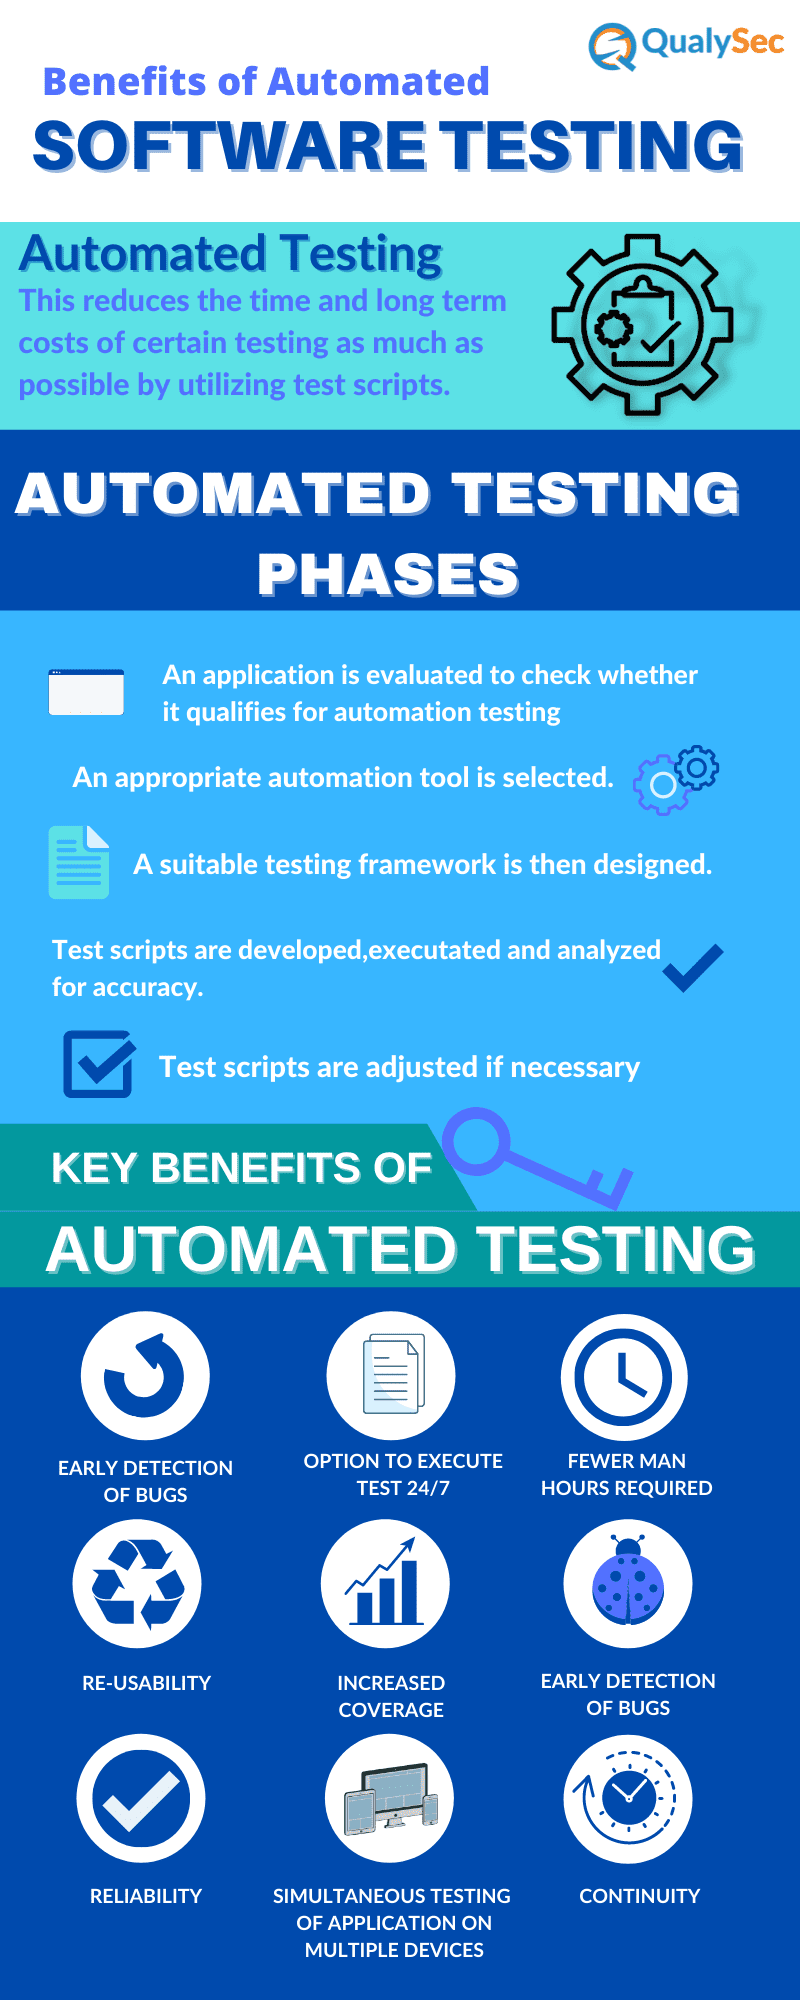 Benefits of Automated Software Testing